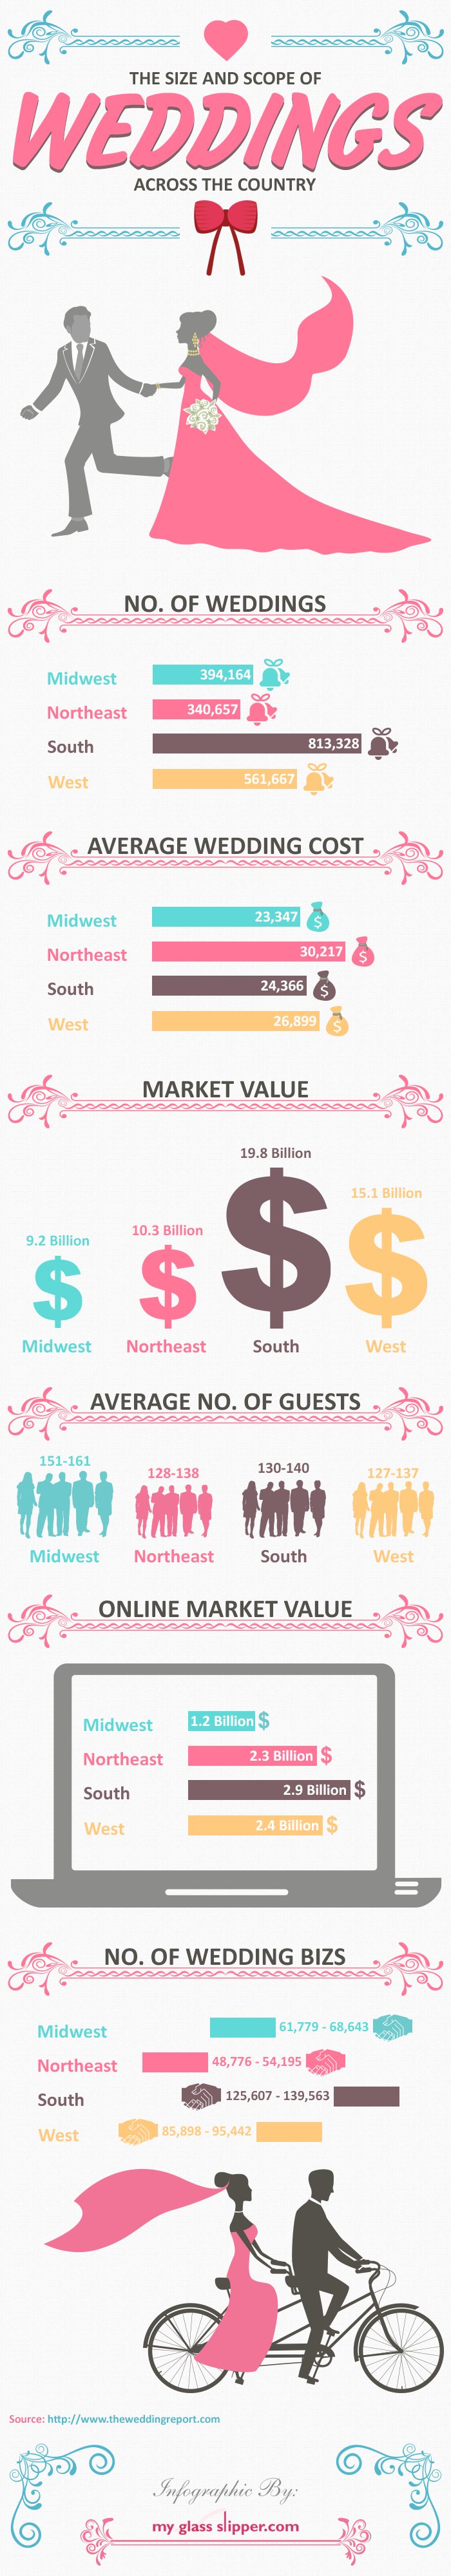 The Size and Scope of Weddings Across The United States 